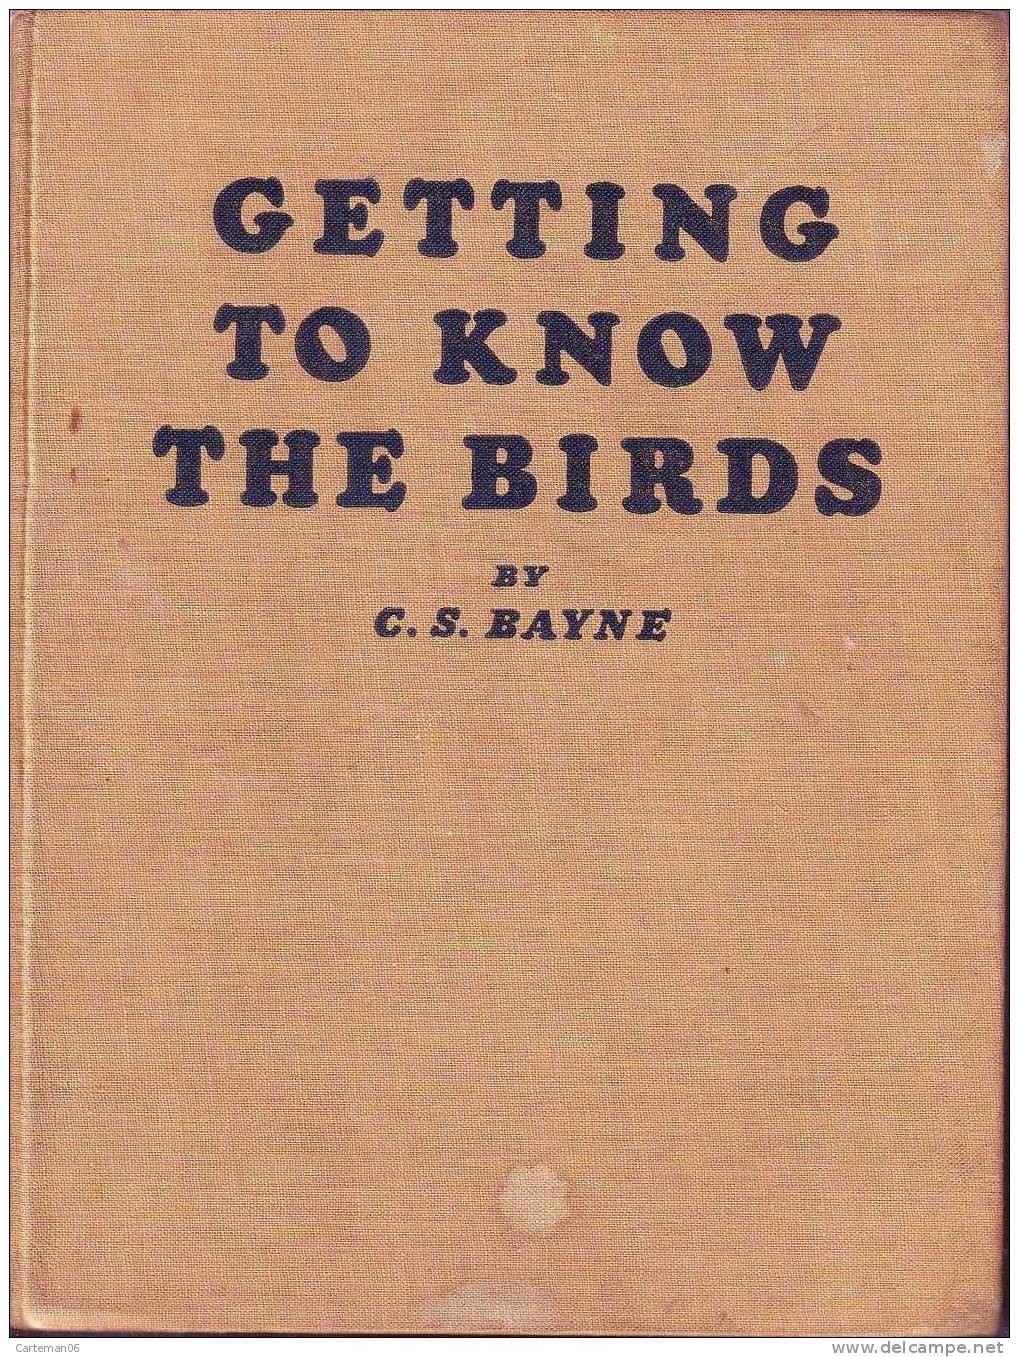 Livre - Getting To Know The Birds By C.S Bayne Illustrated By Ralston Gudgeon R.S.W 1944 (oiseaux) - Dieren